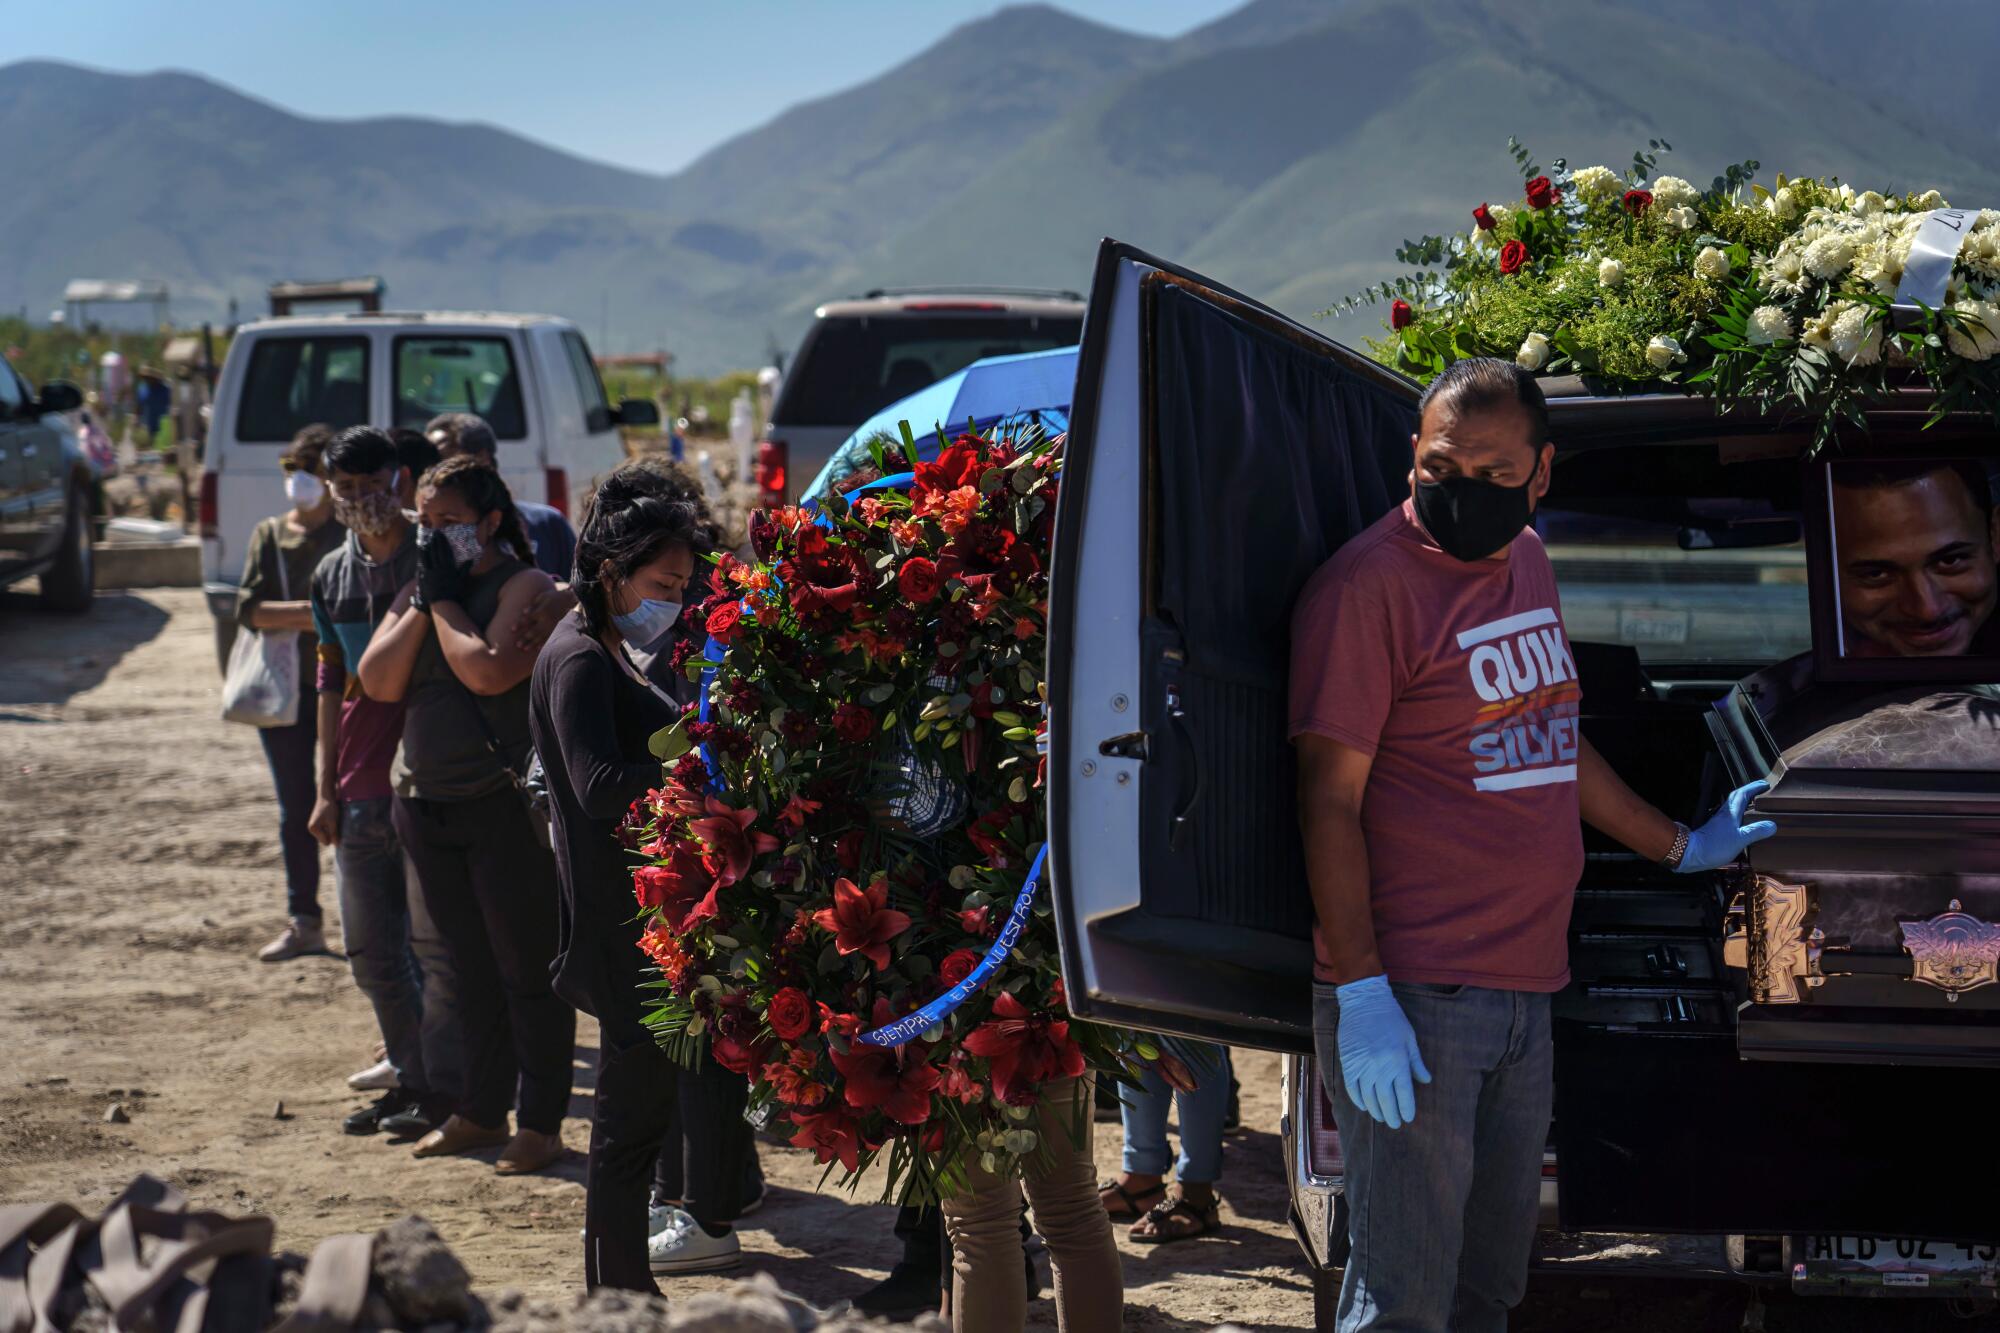 A funeral home worker prepares to unload a casket for cemetery workers to transfer into a grave as family members of the deceased stand nearby.